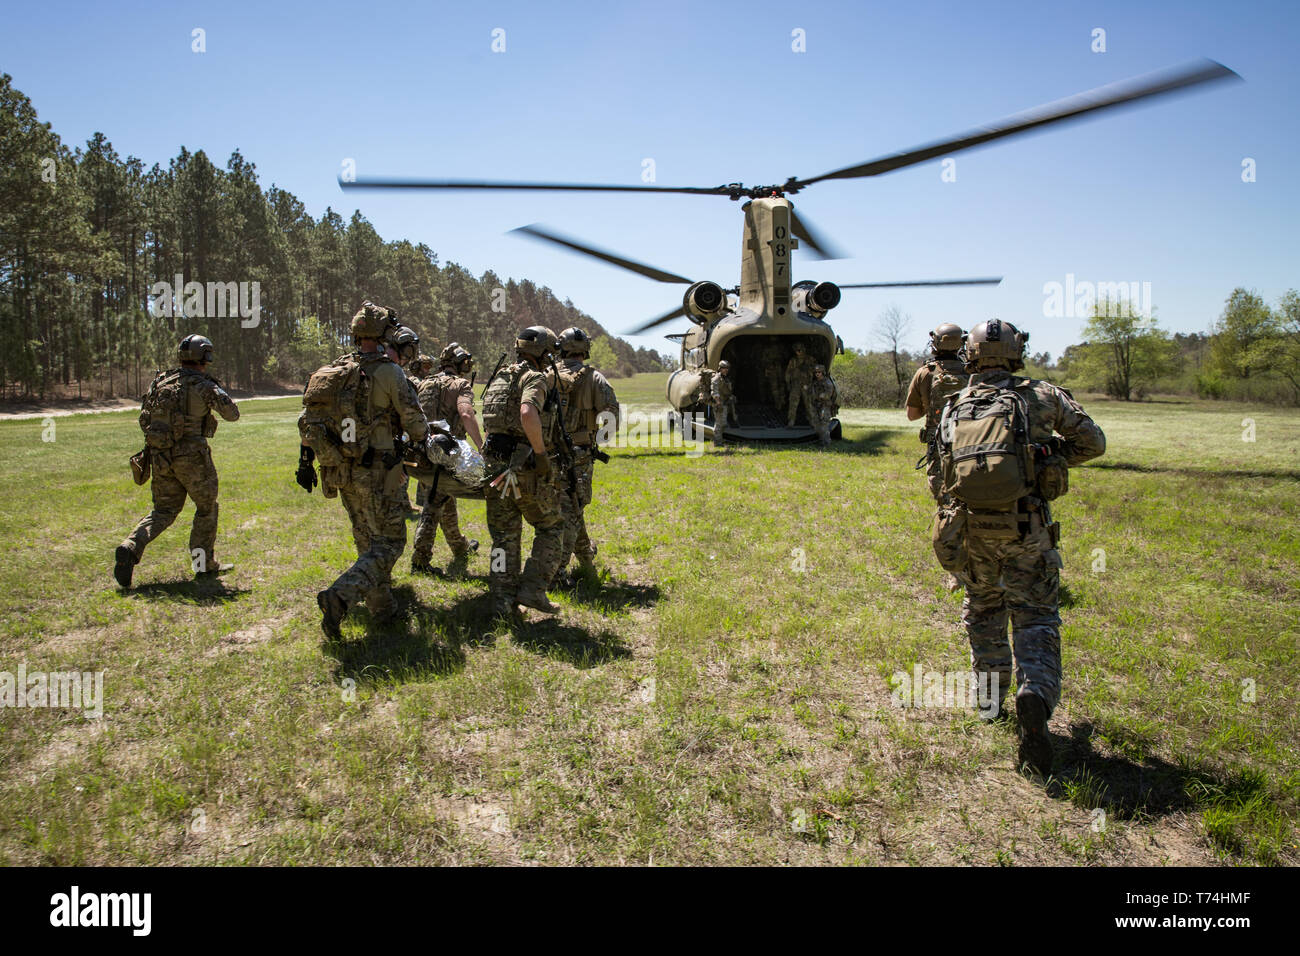 Green Berets assigned to 3rd Special Forces Group (Airborne) enter the back of a CH-47 Chinook helicopter after conducting a raid during a routine training mission April 10, 2019 at Camp Mackal, NC. The Green Berets focused on utilizing new communication systems and casualty care during the training mission. (U.S. Army Photo by Sgt. Steven Lewis) Stock Photo